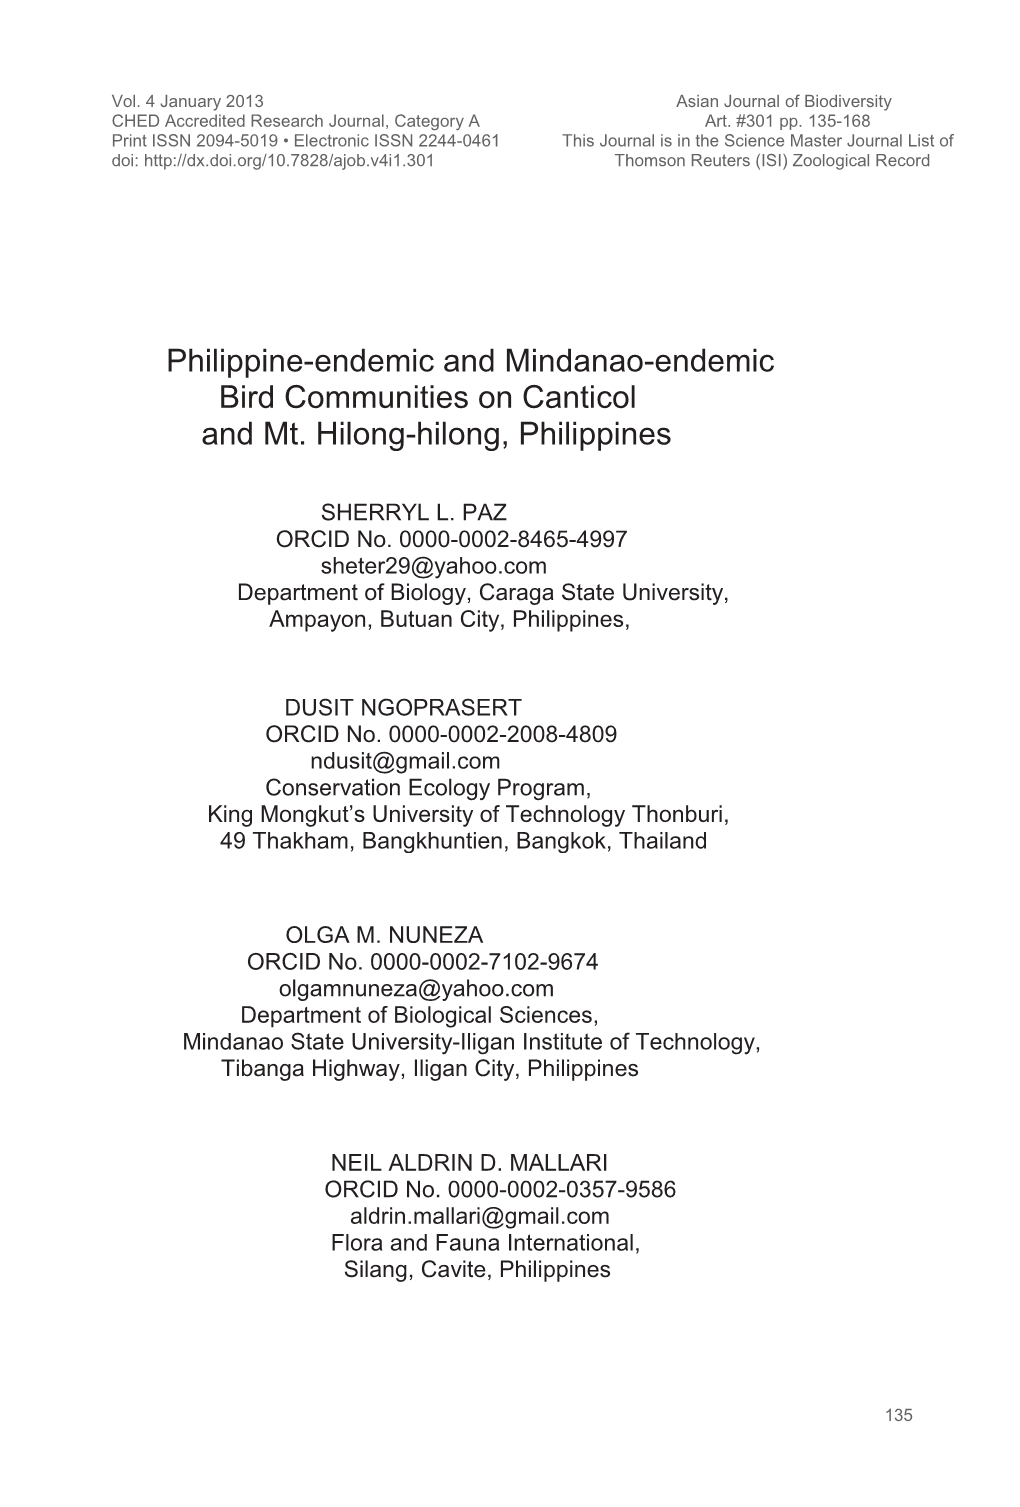 Philippine-Endemic and Mindanao-Endemic Bird Communities on Canticol and Mt